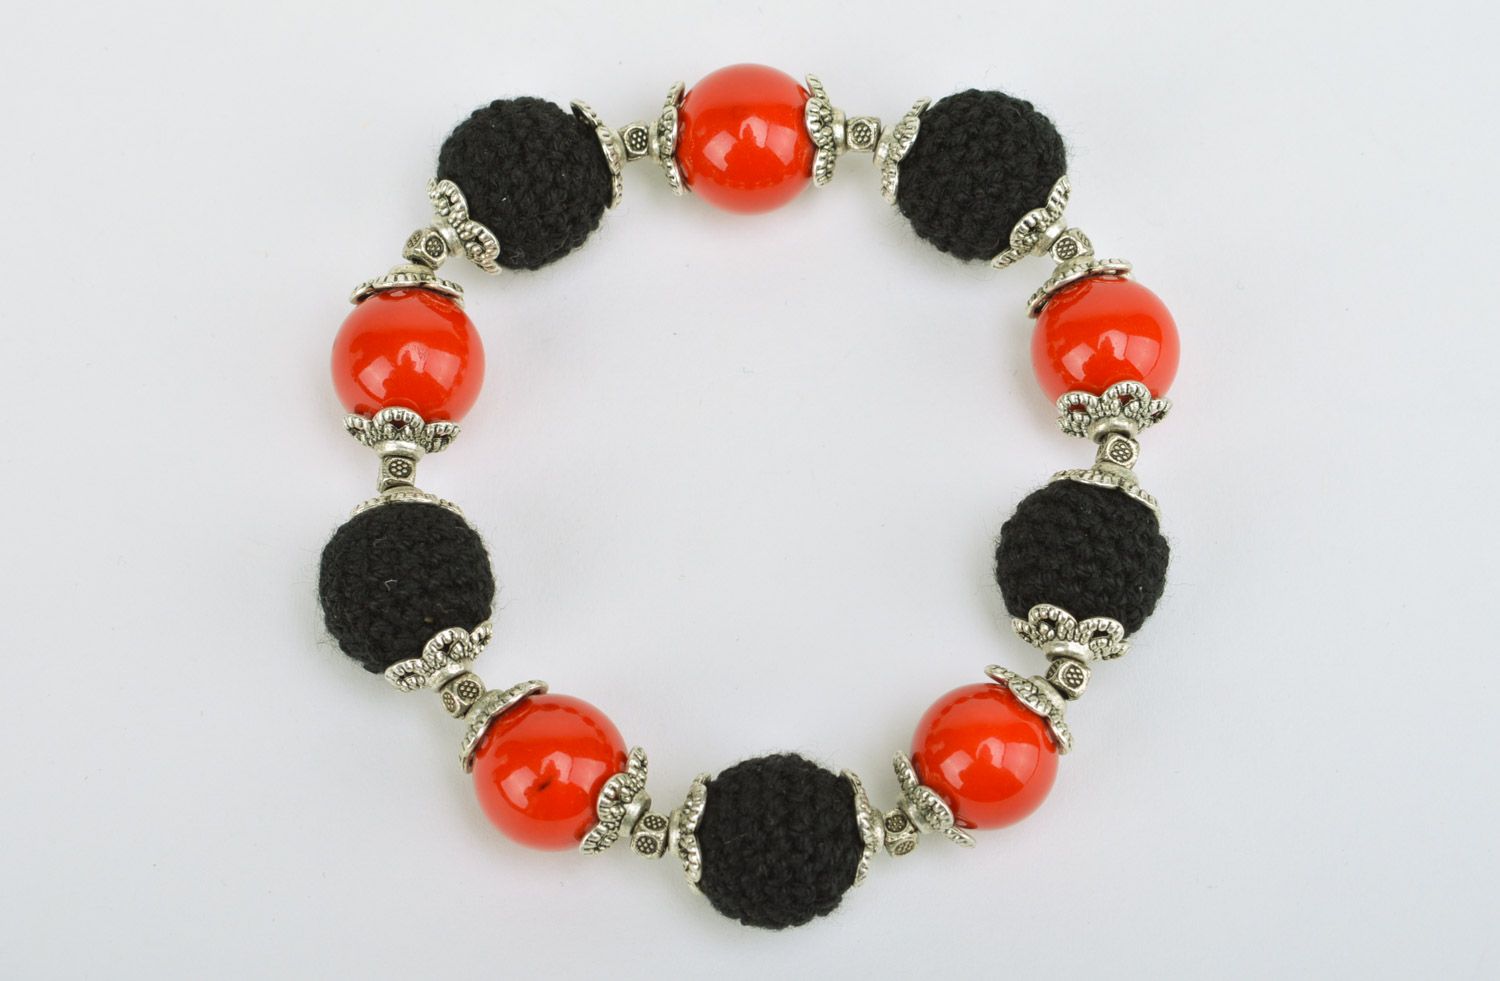 Handmade red and black wrist bracelet with beads crocheted over with threads Passion photo 2